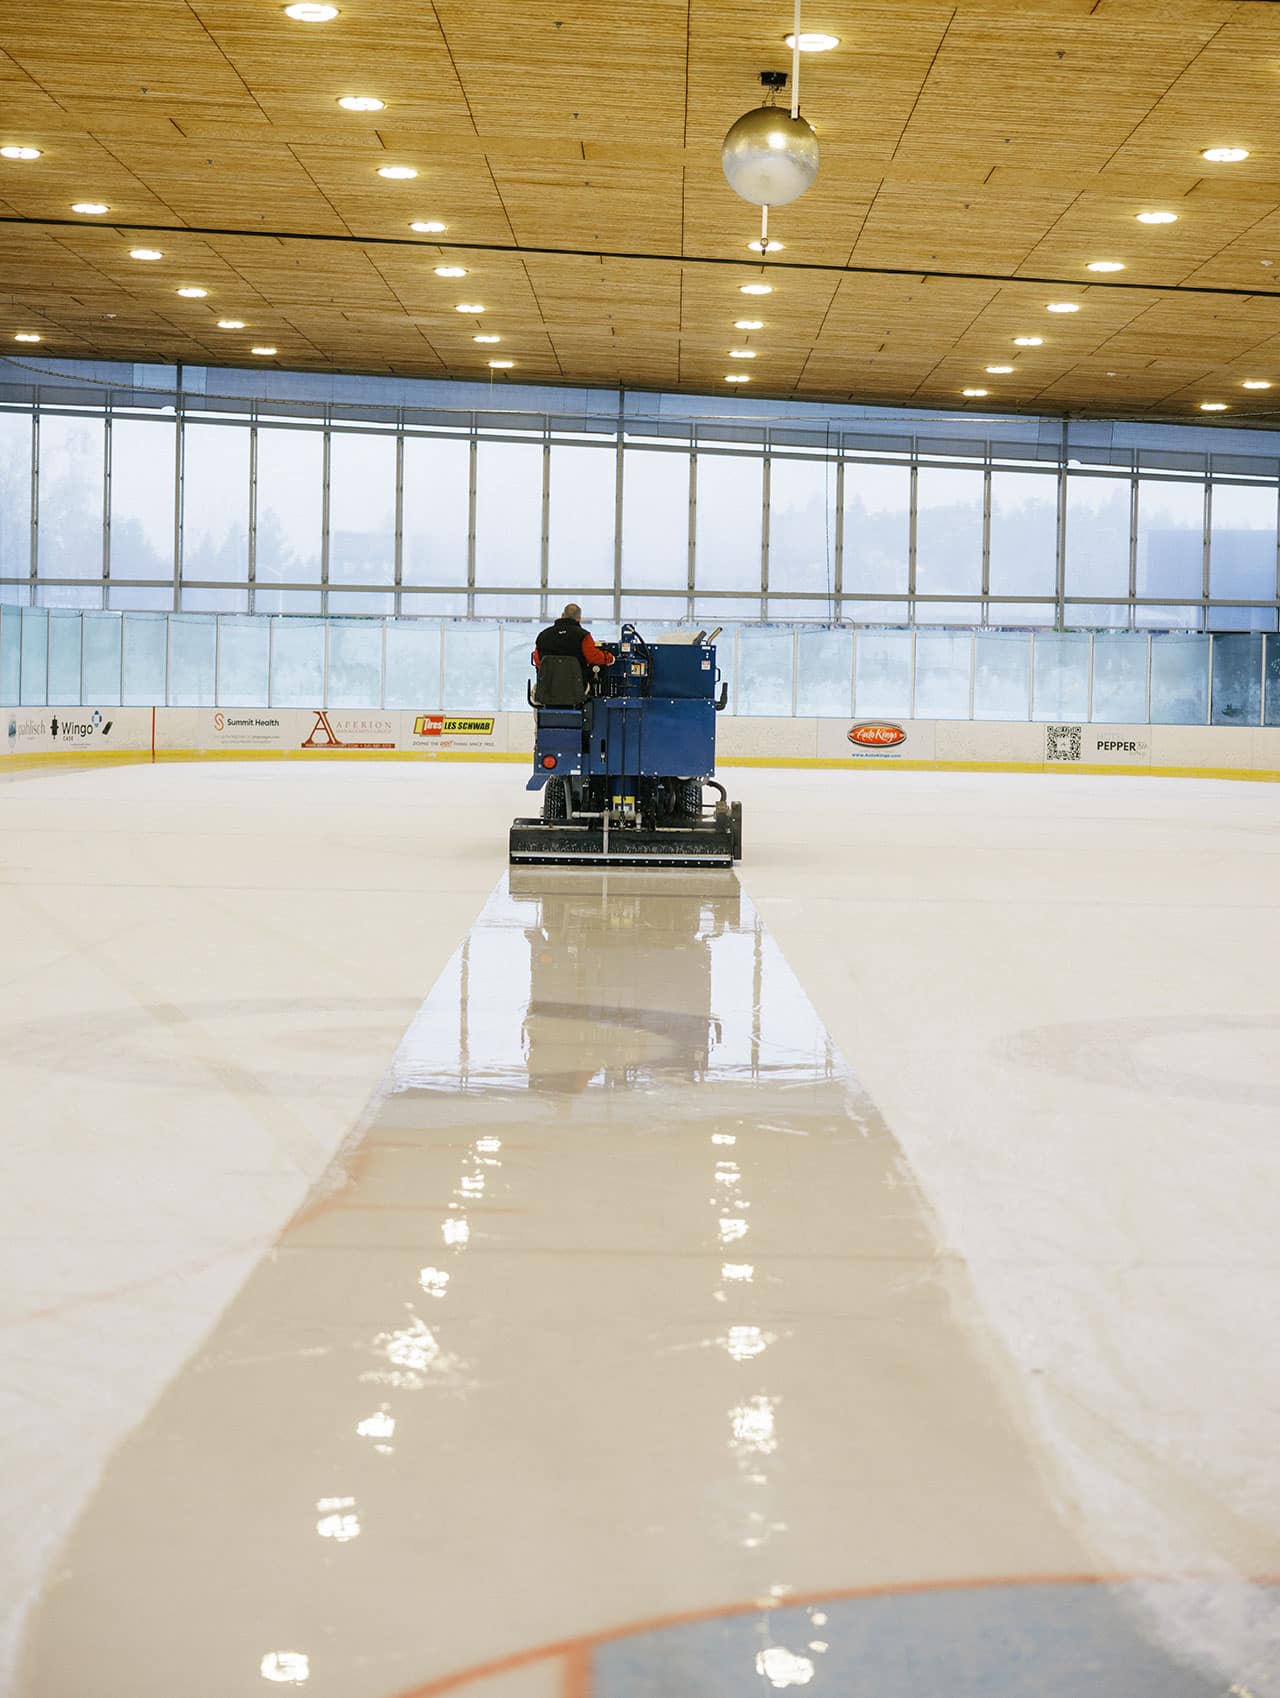 Zamboni at work smoothing the ice at the Pavillion in Bend